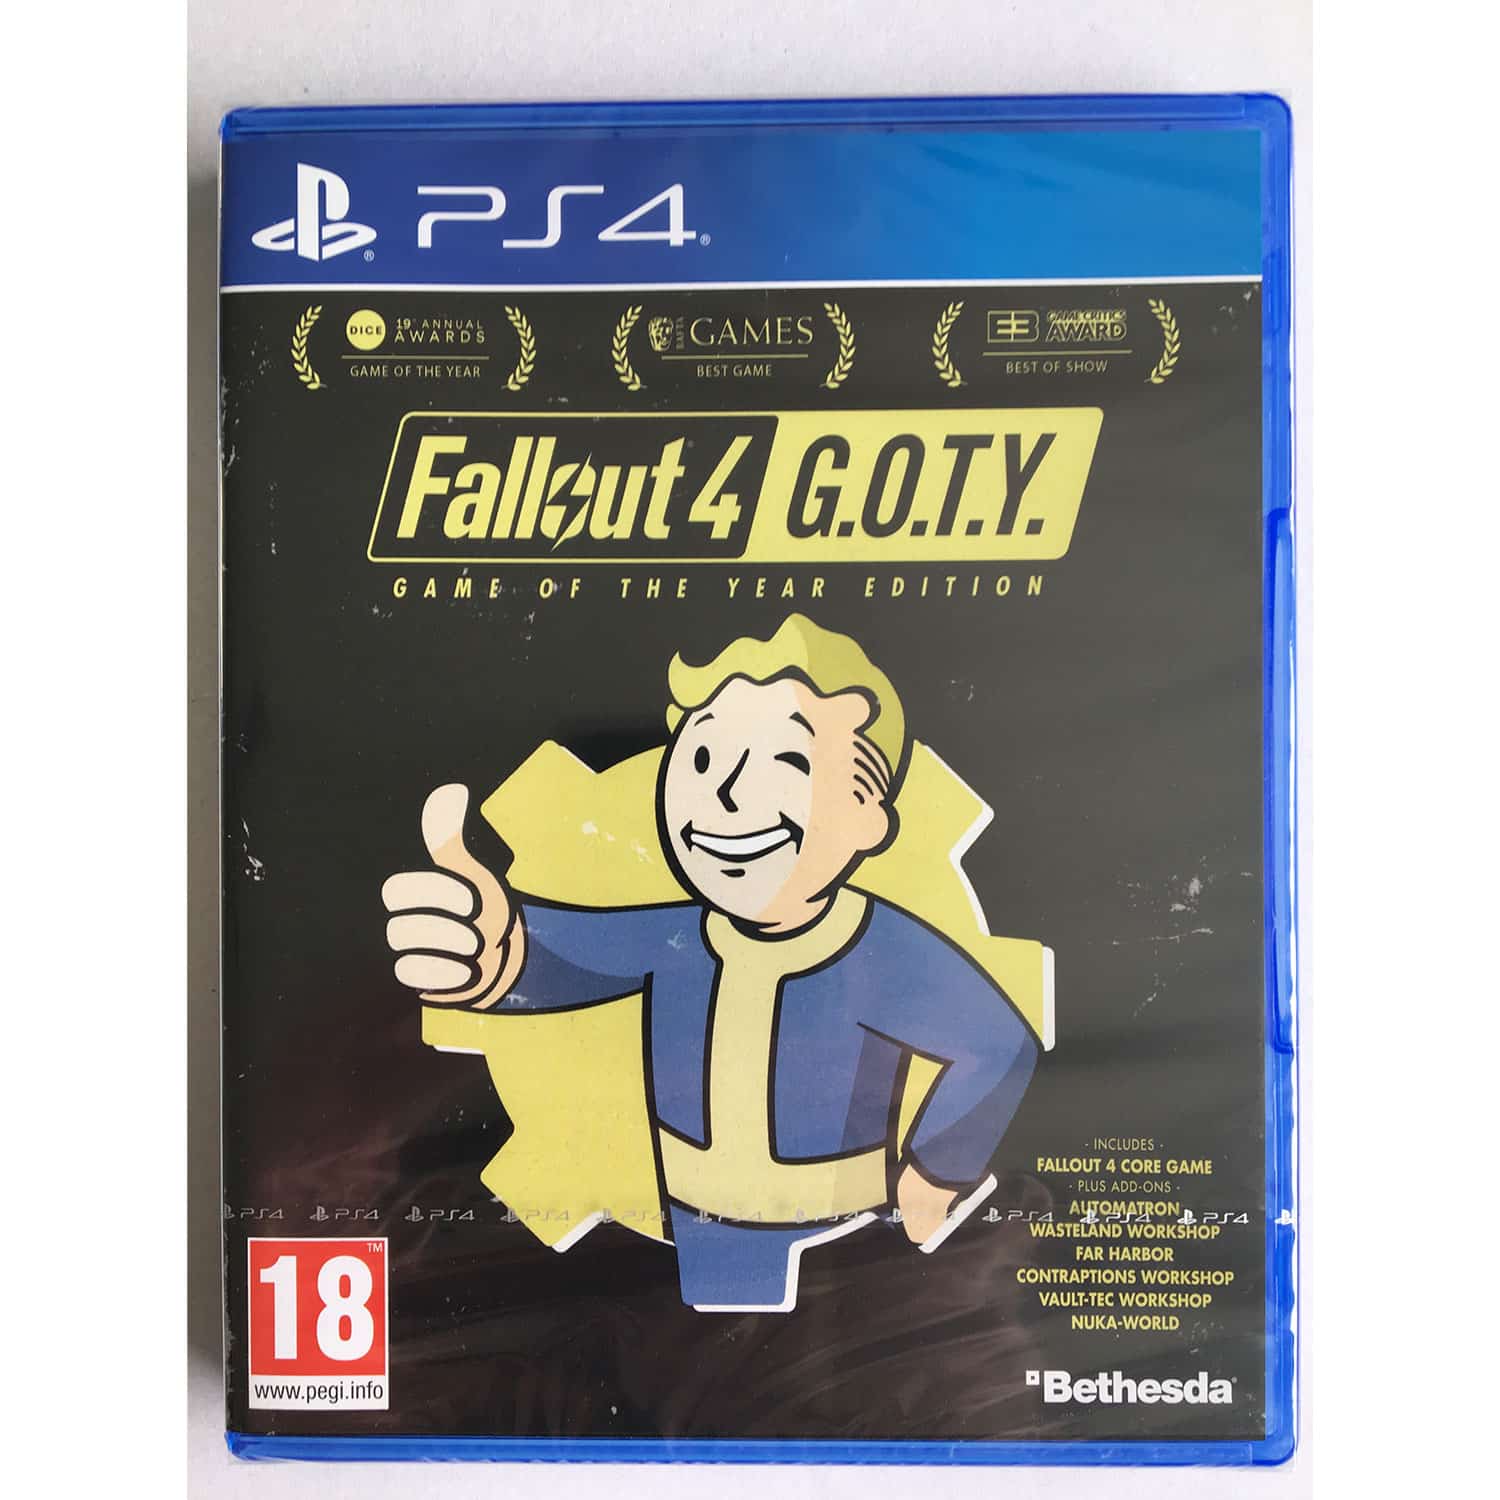 Fallout 4 Game of the Year Edition (PS4) GOTY New and Sealed